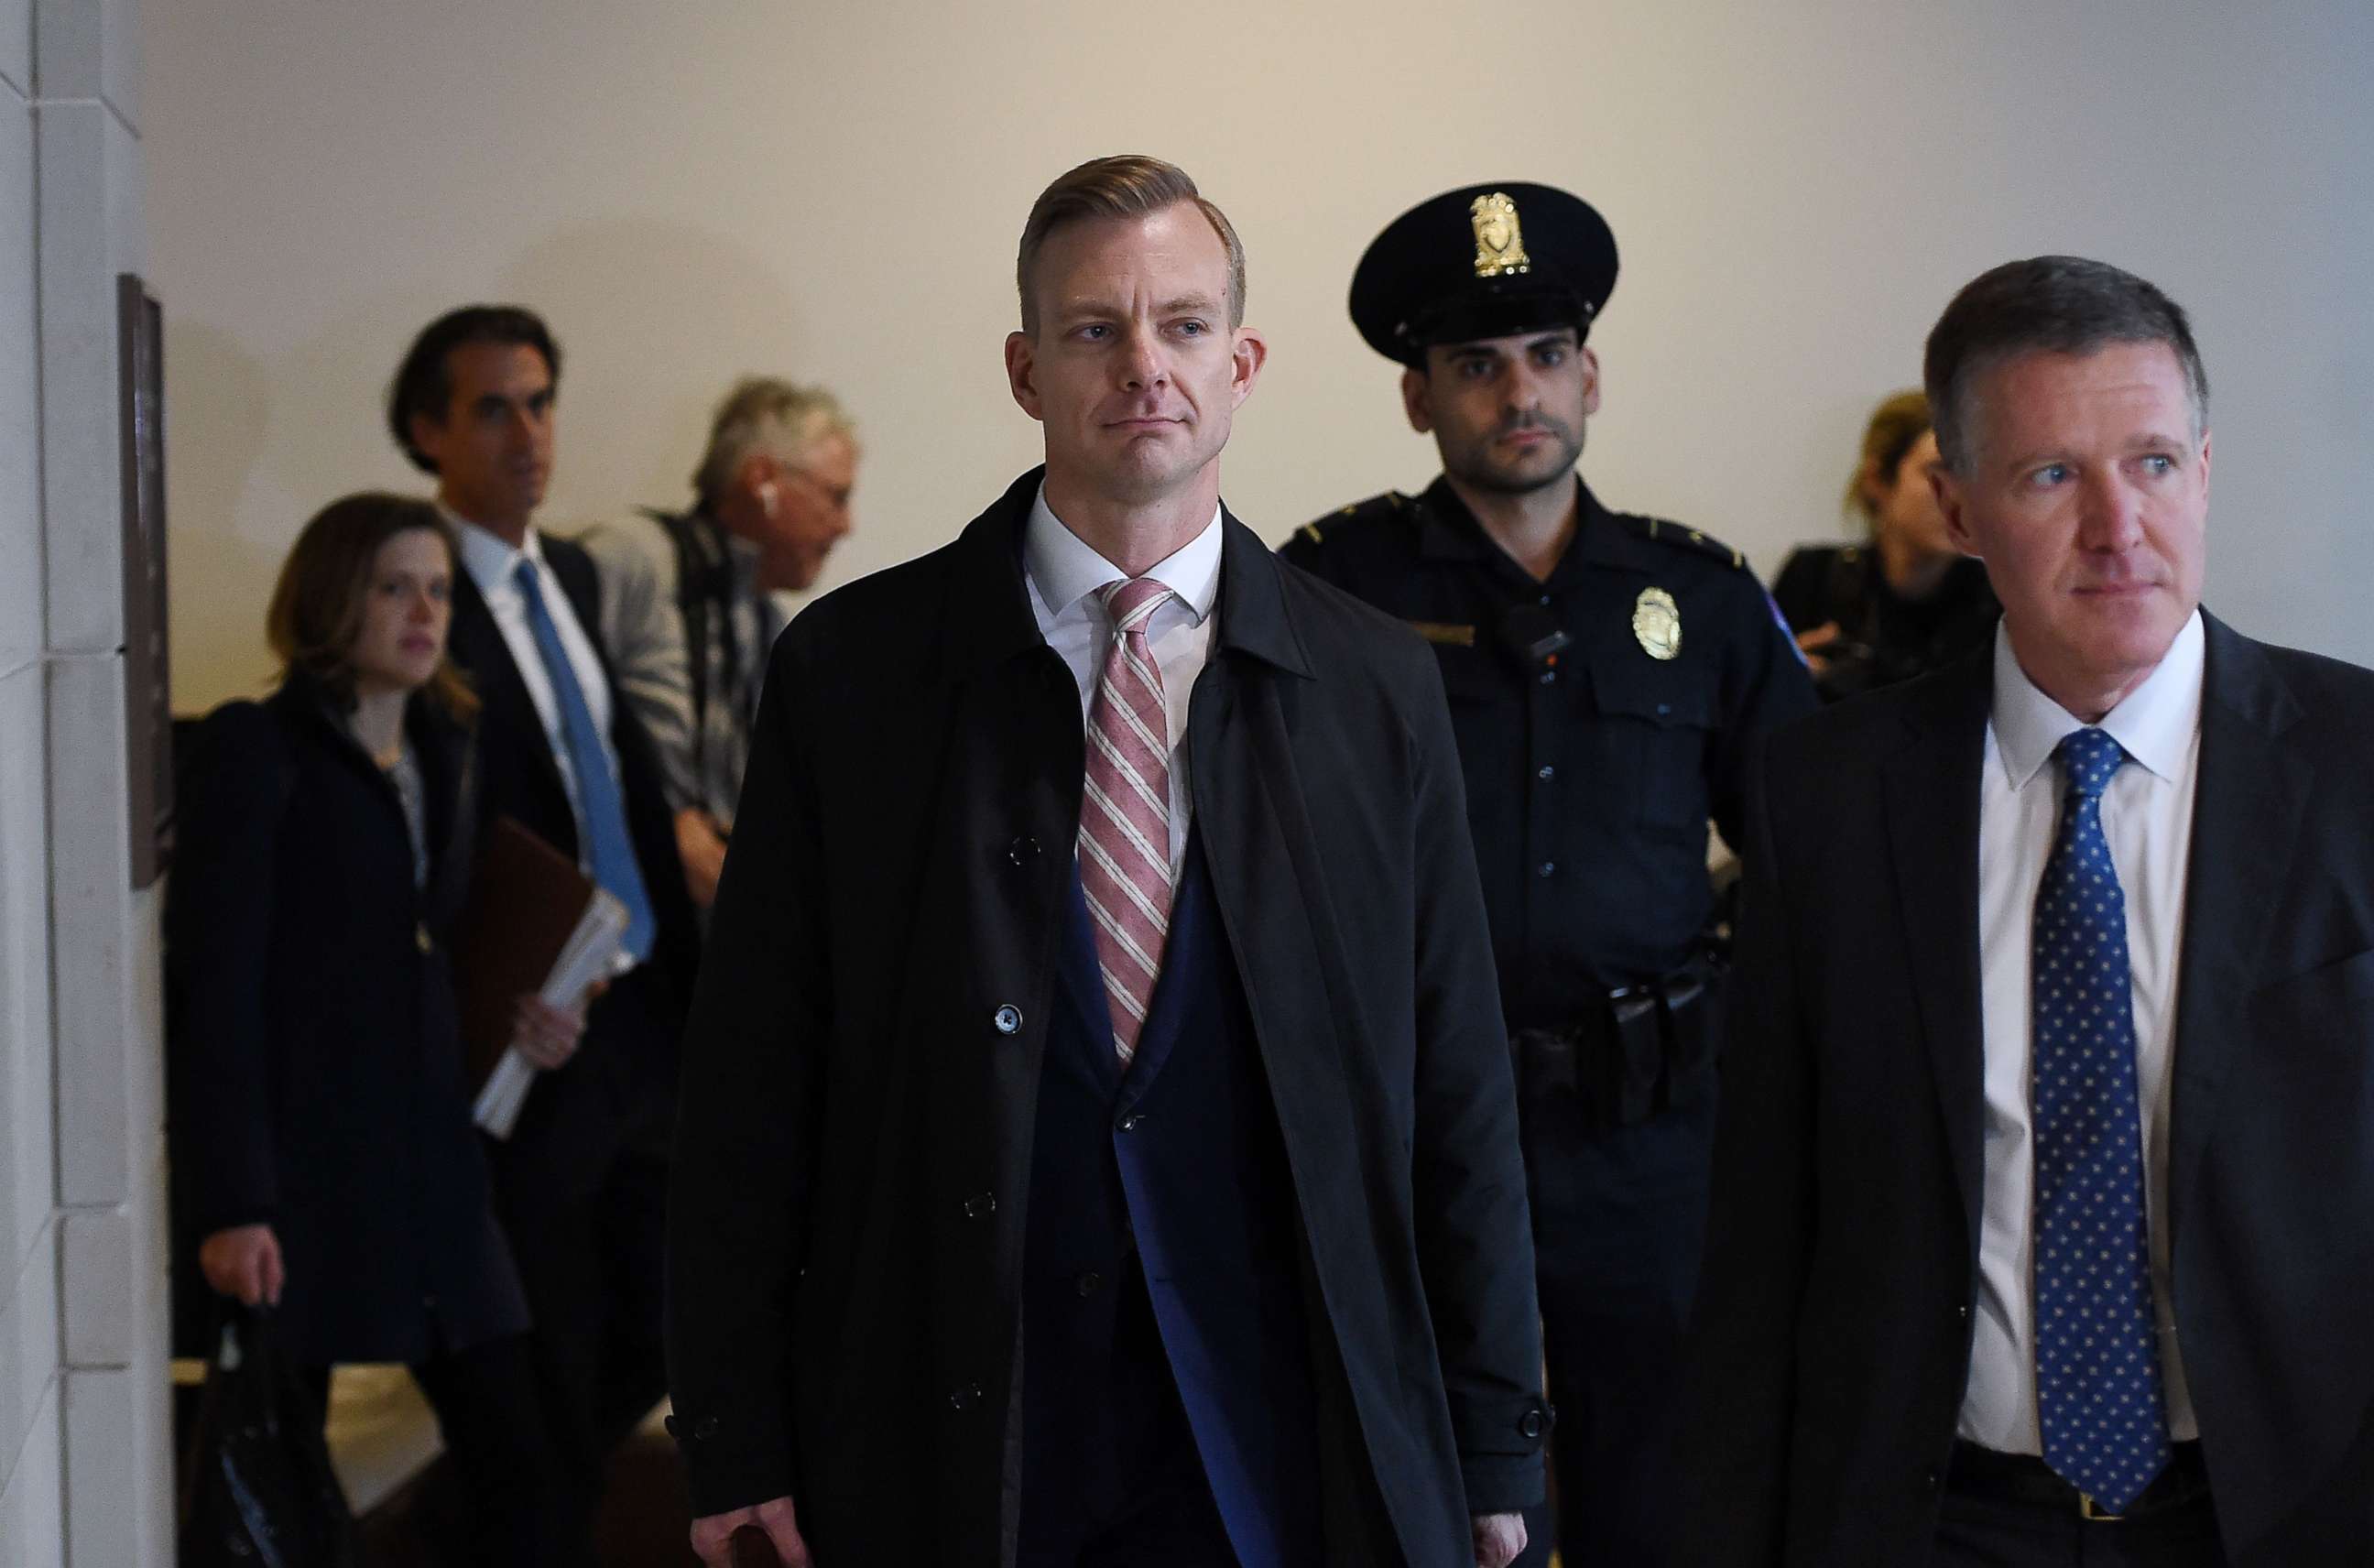 PHOTO: David Holmes, a State Department official, arrives to appear in a closed-door deposition hearing as part of the impeachment inquiry at the US Capitol in Washington, DC, on November 15, 2019.